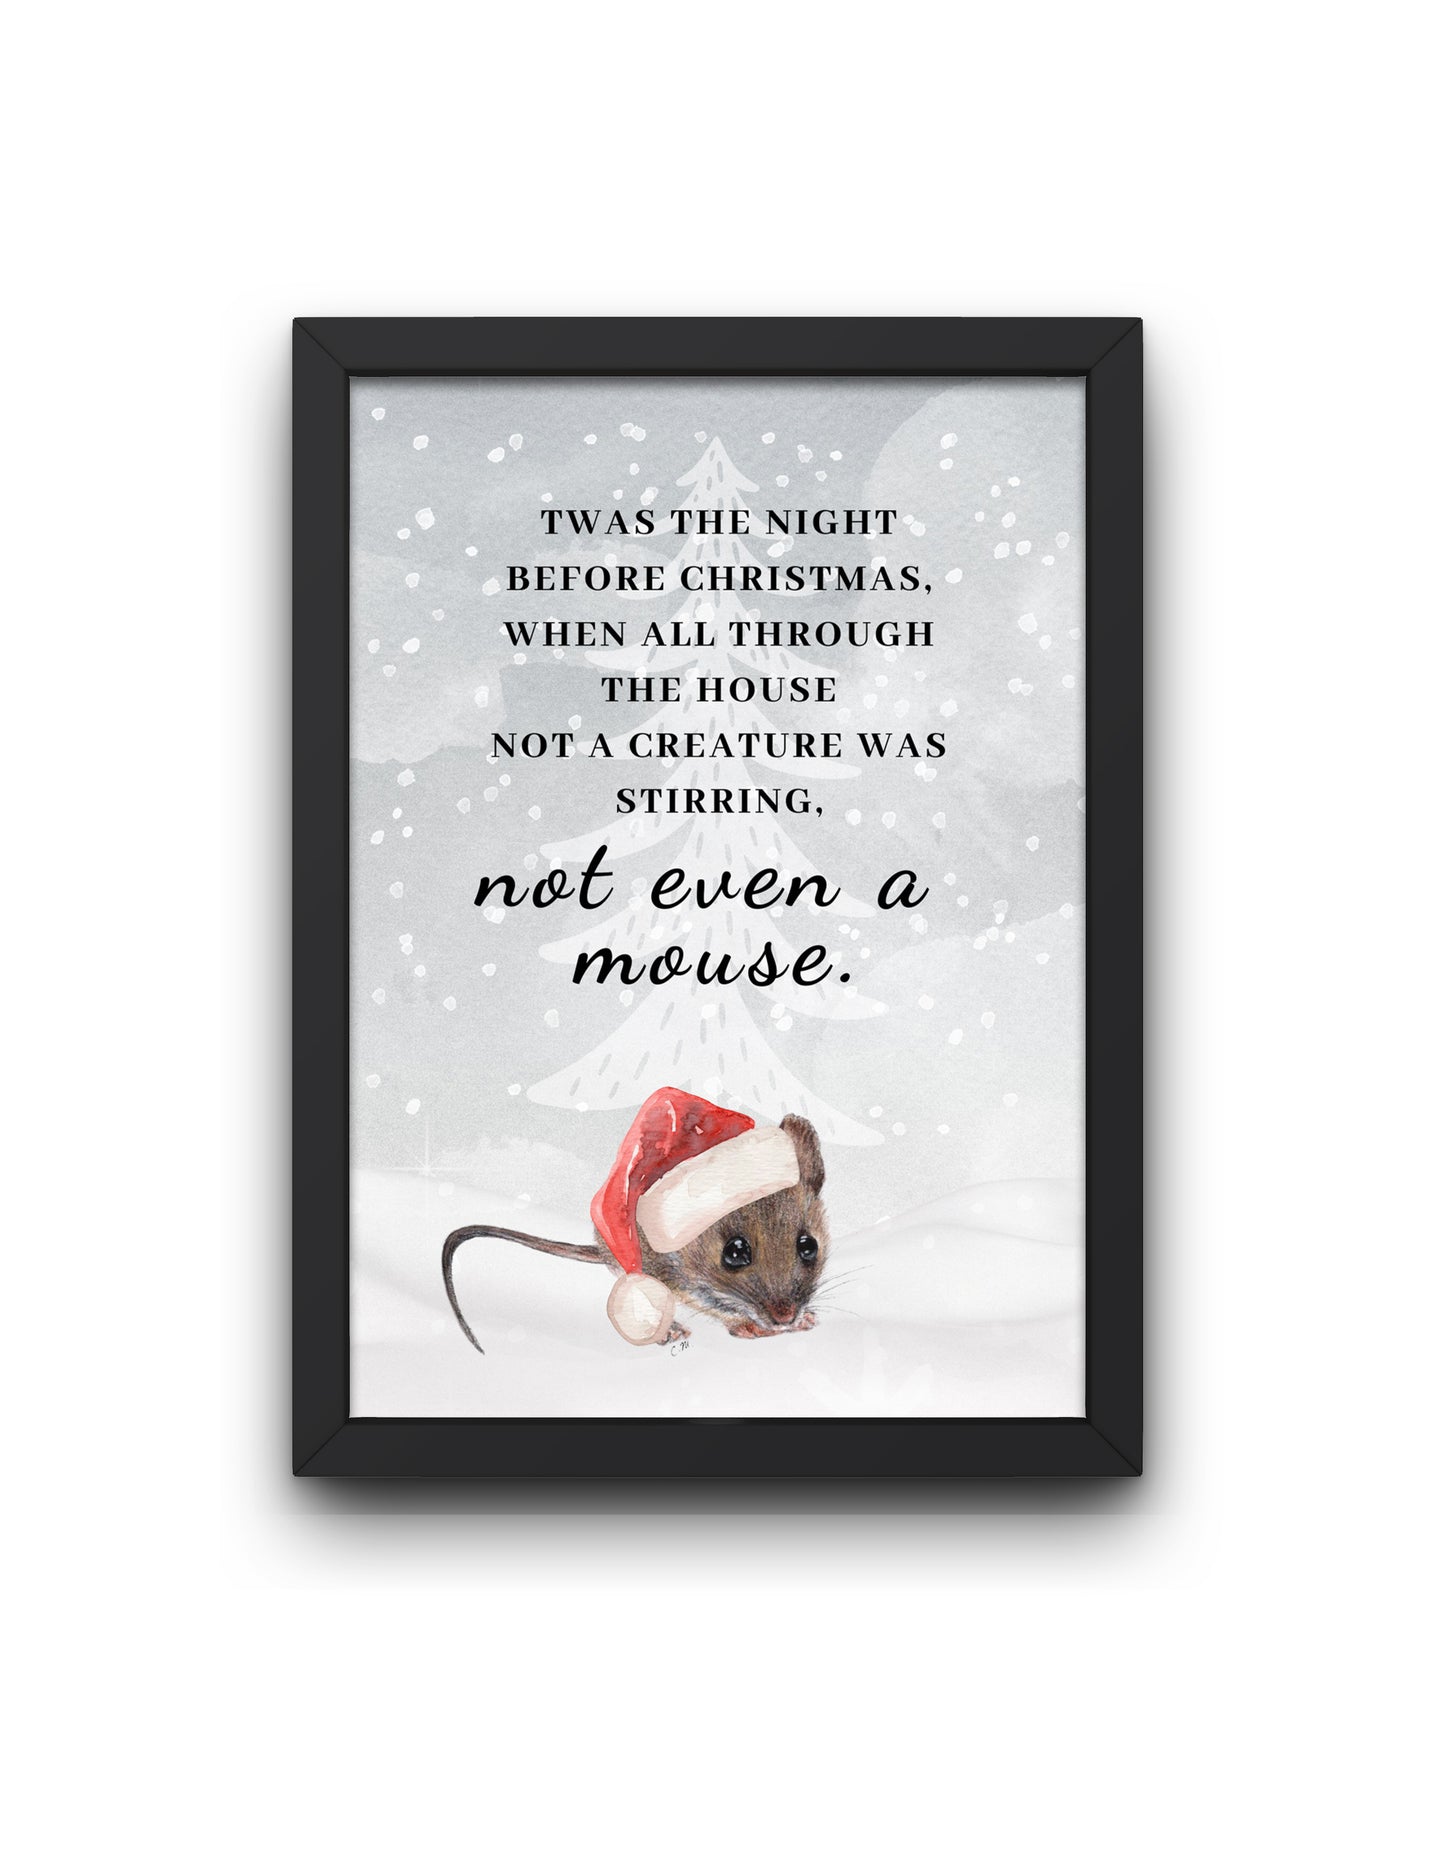 Mouse Christmas decor, Twas the night before Christmas, Not a creature stirring, Santa mouse art, Cute mouse holiday decor, Festive mouse